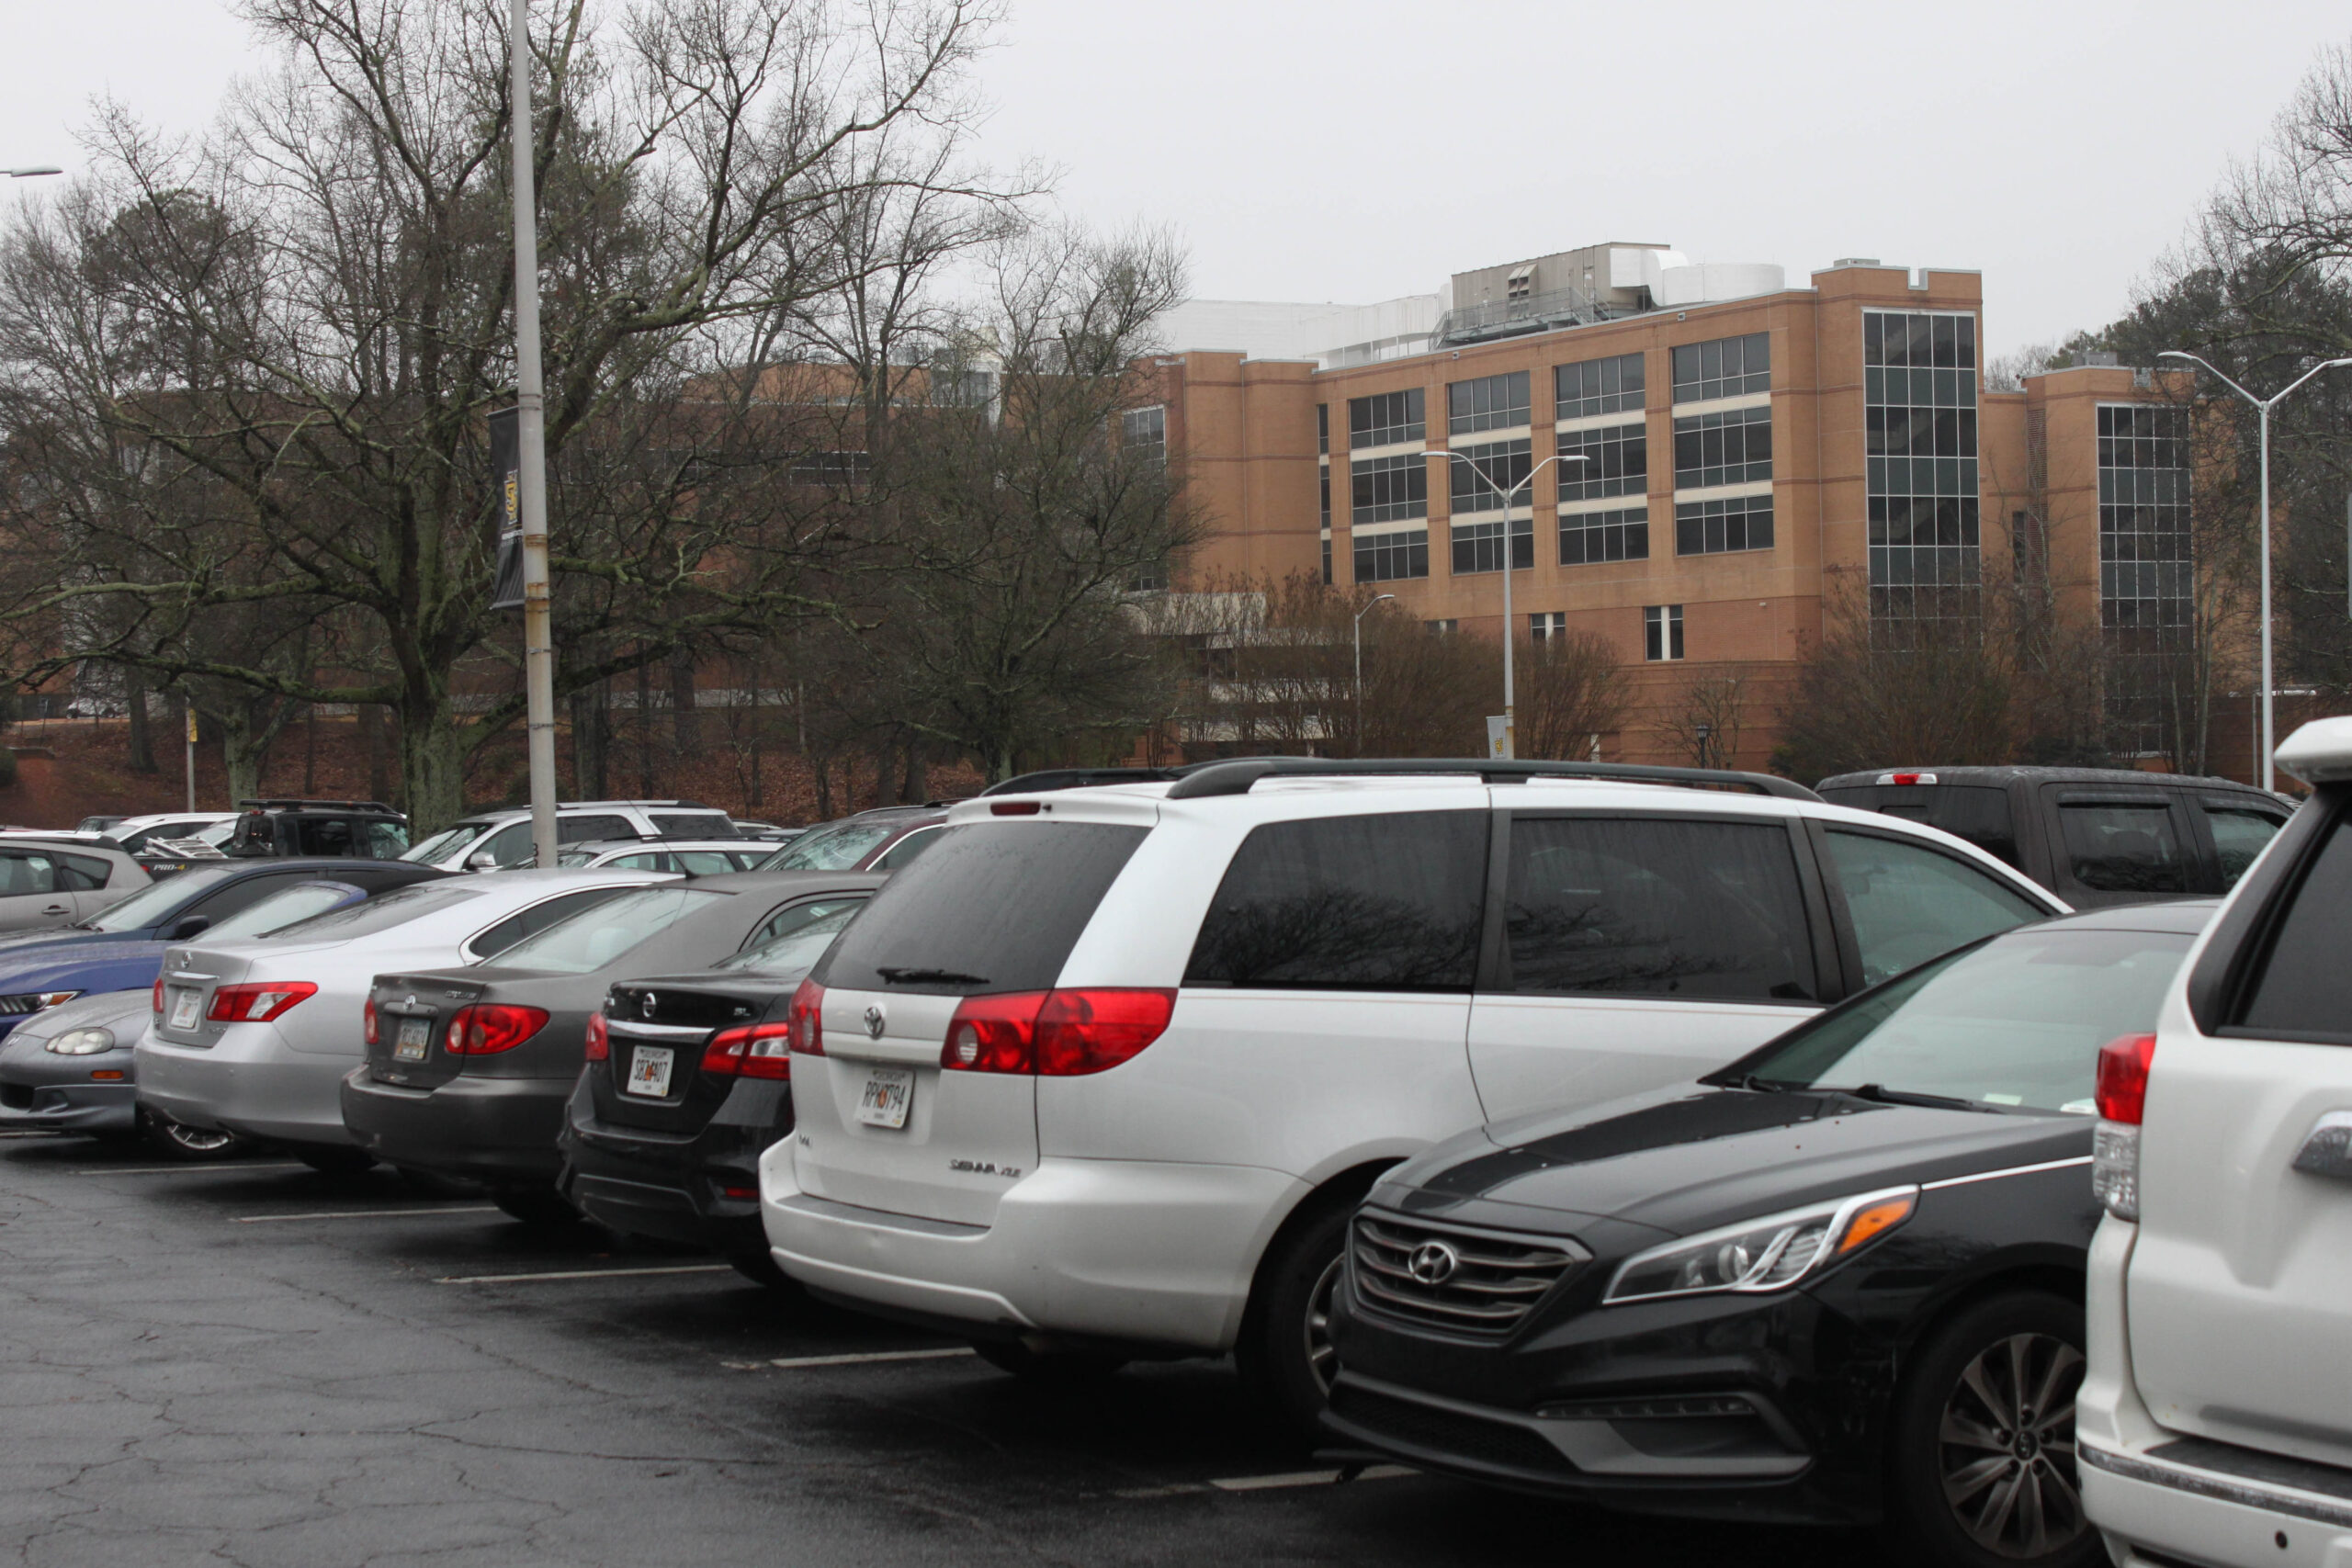 Lot A filled with students due to not enough spots being provided in parking decks.